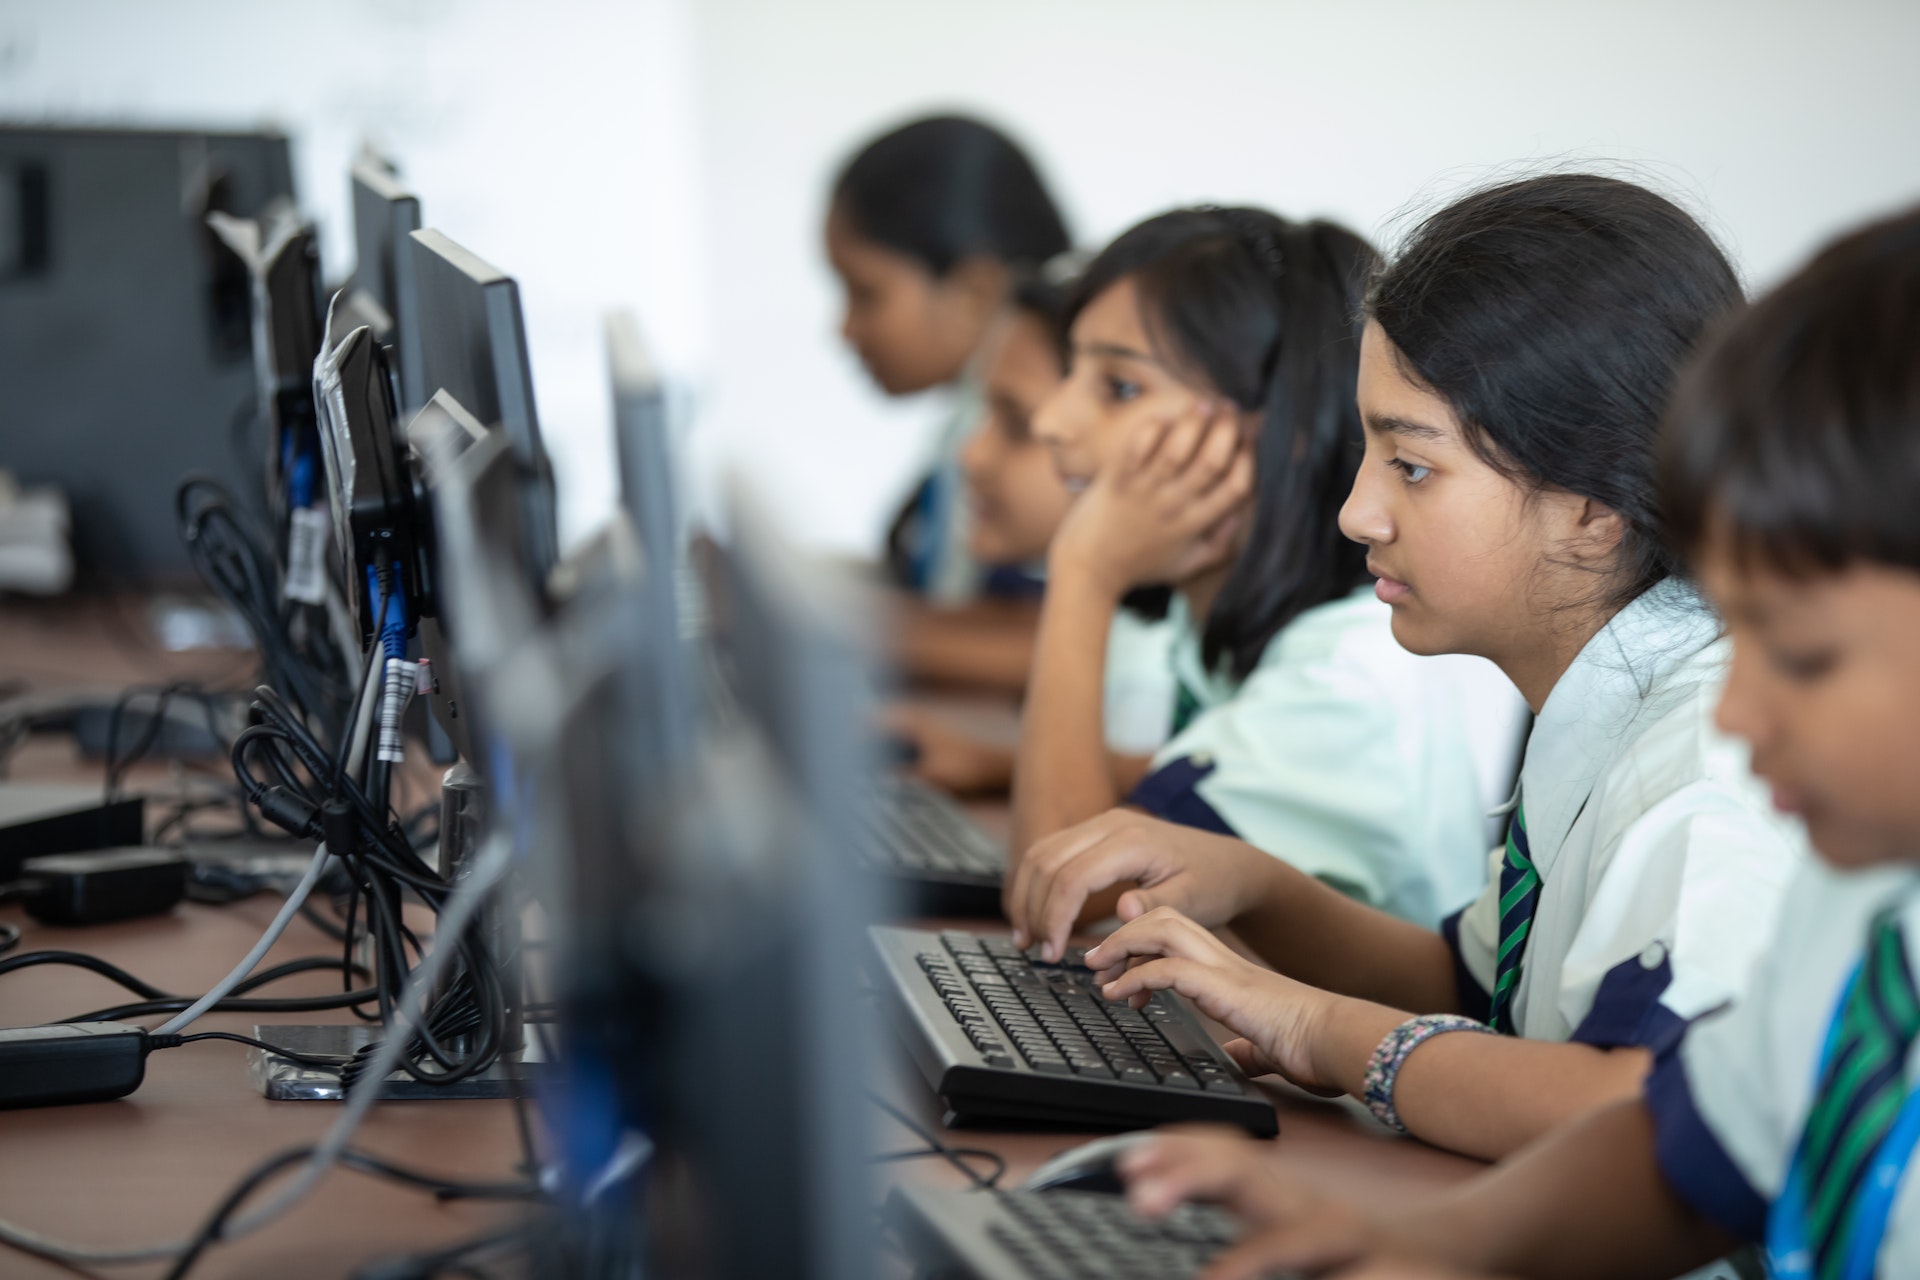 Indian students in a classroom working on computers